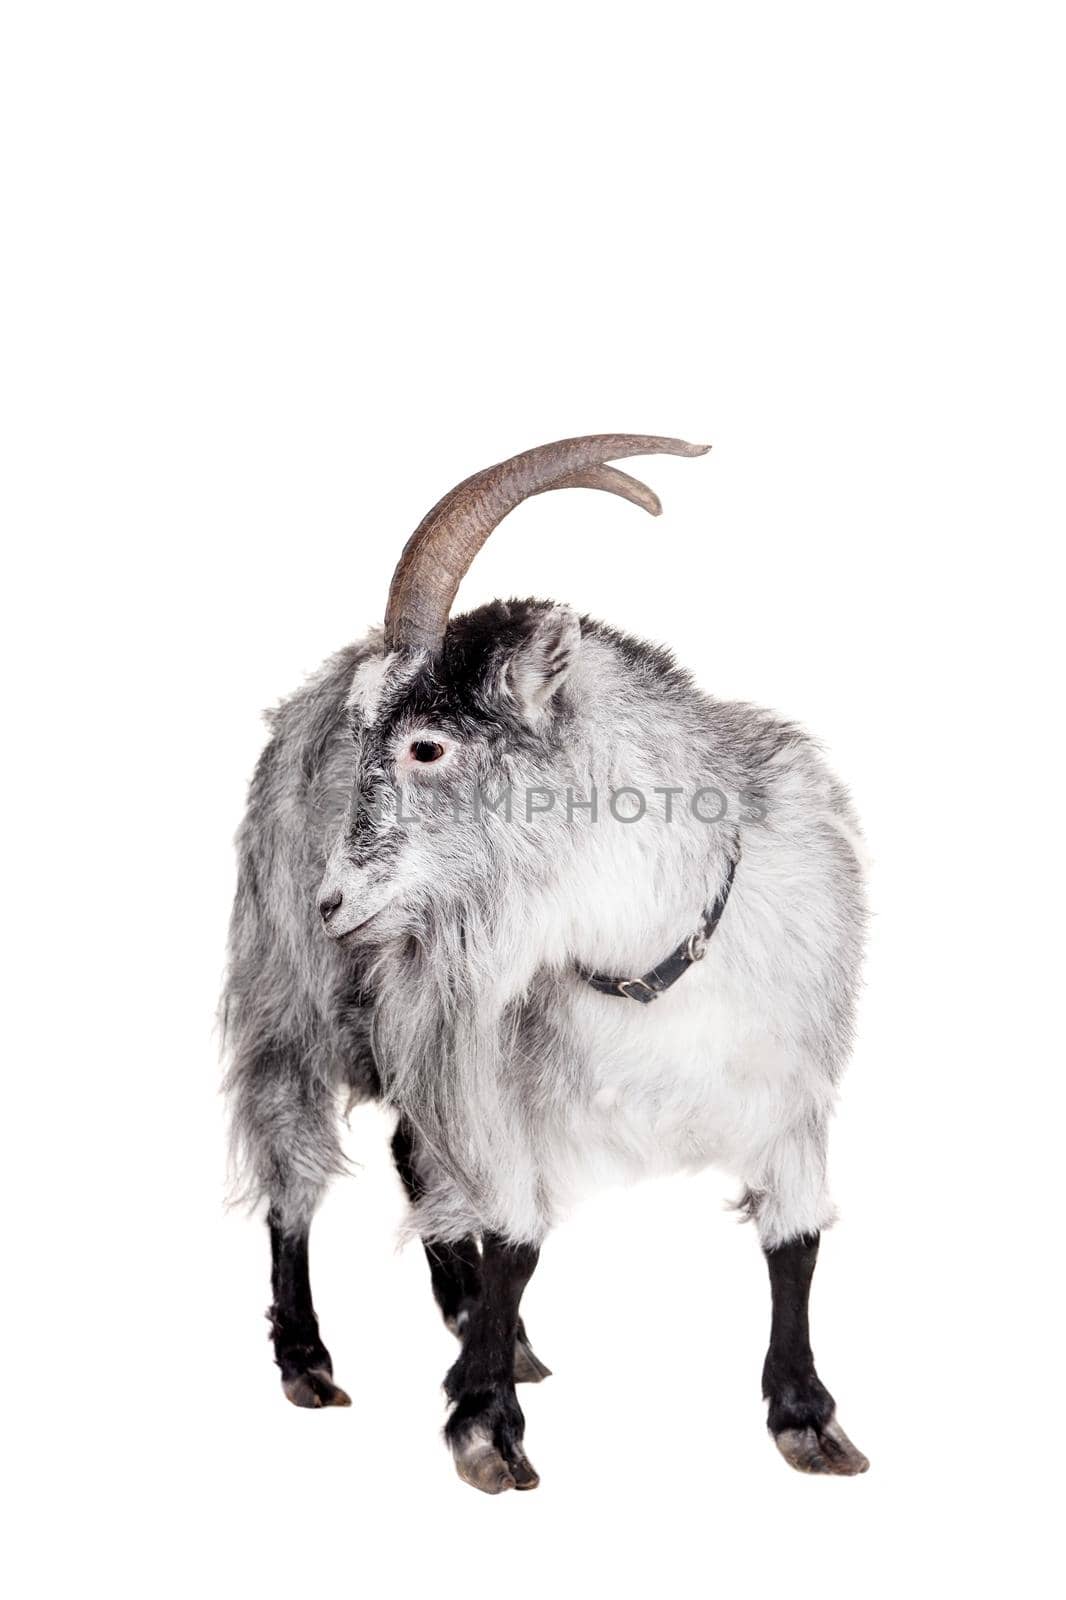 Goat Isolated On White by RosaJay